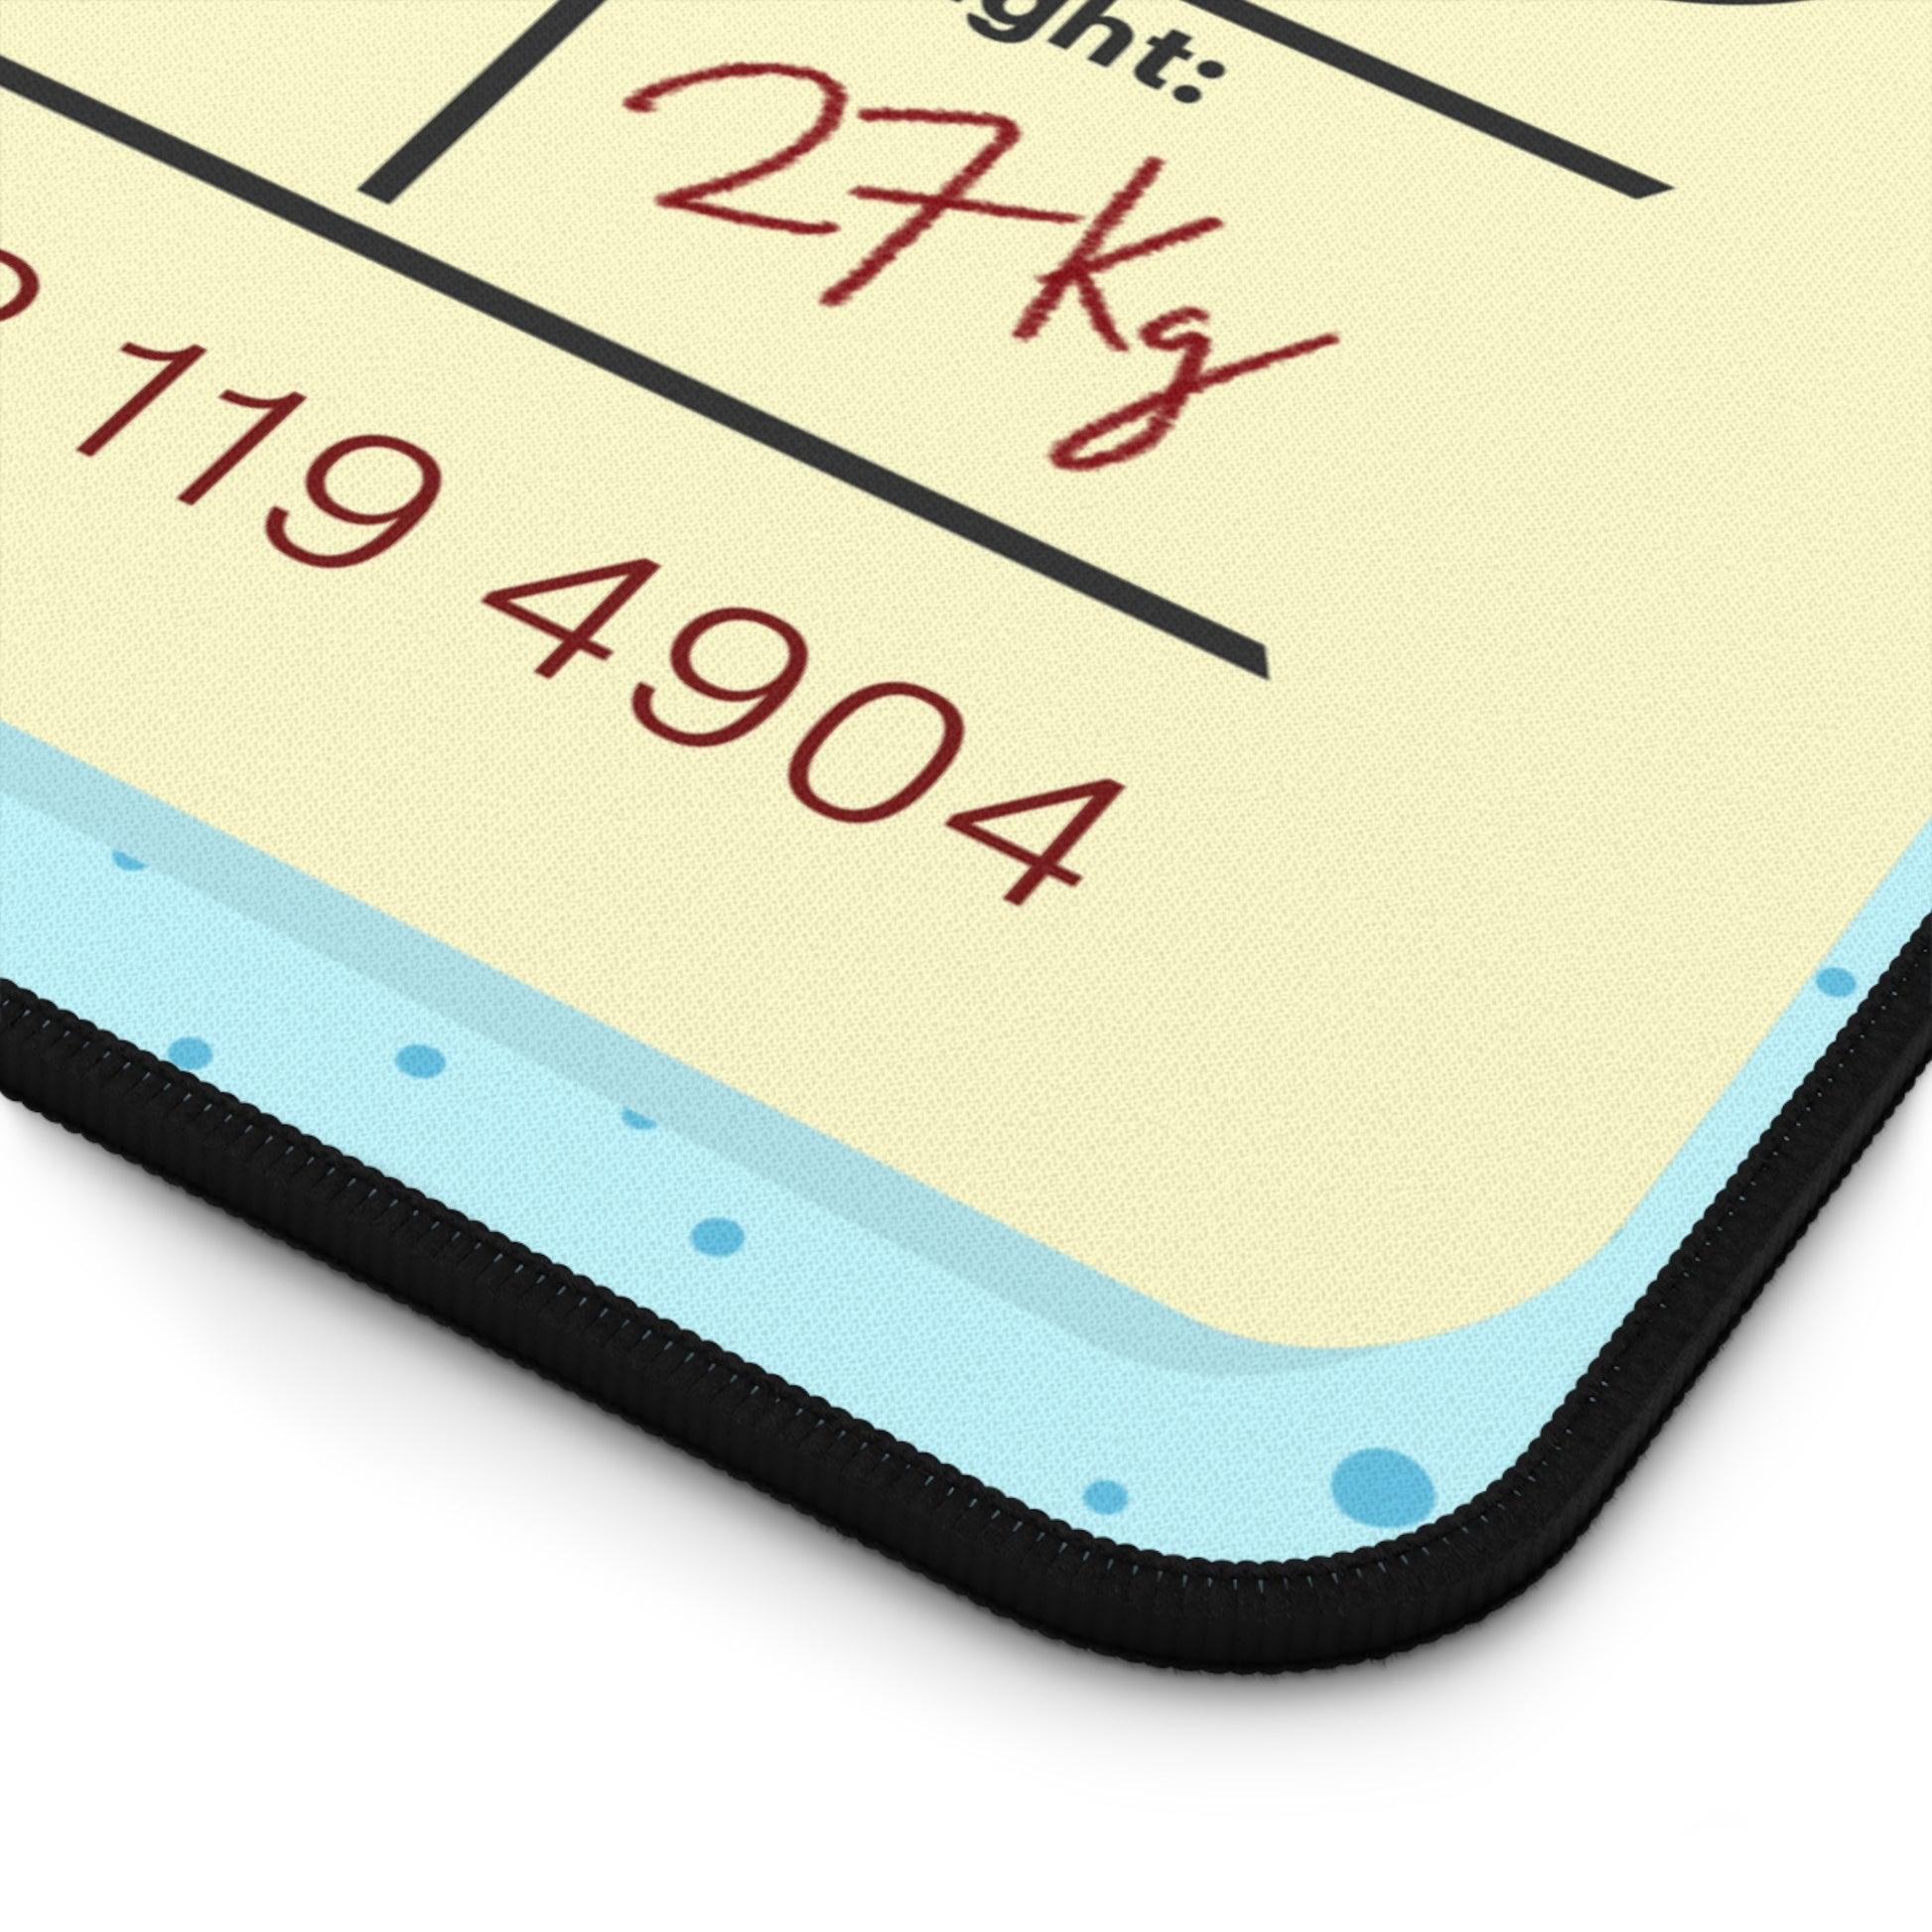 The corner of a 12" x 18" desk mat with a dotted blue background and a blue and yellow Tokyo airline baggage tag on it.